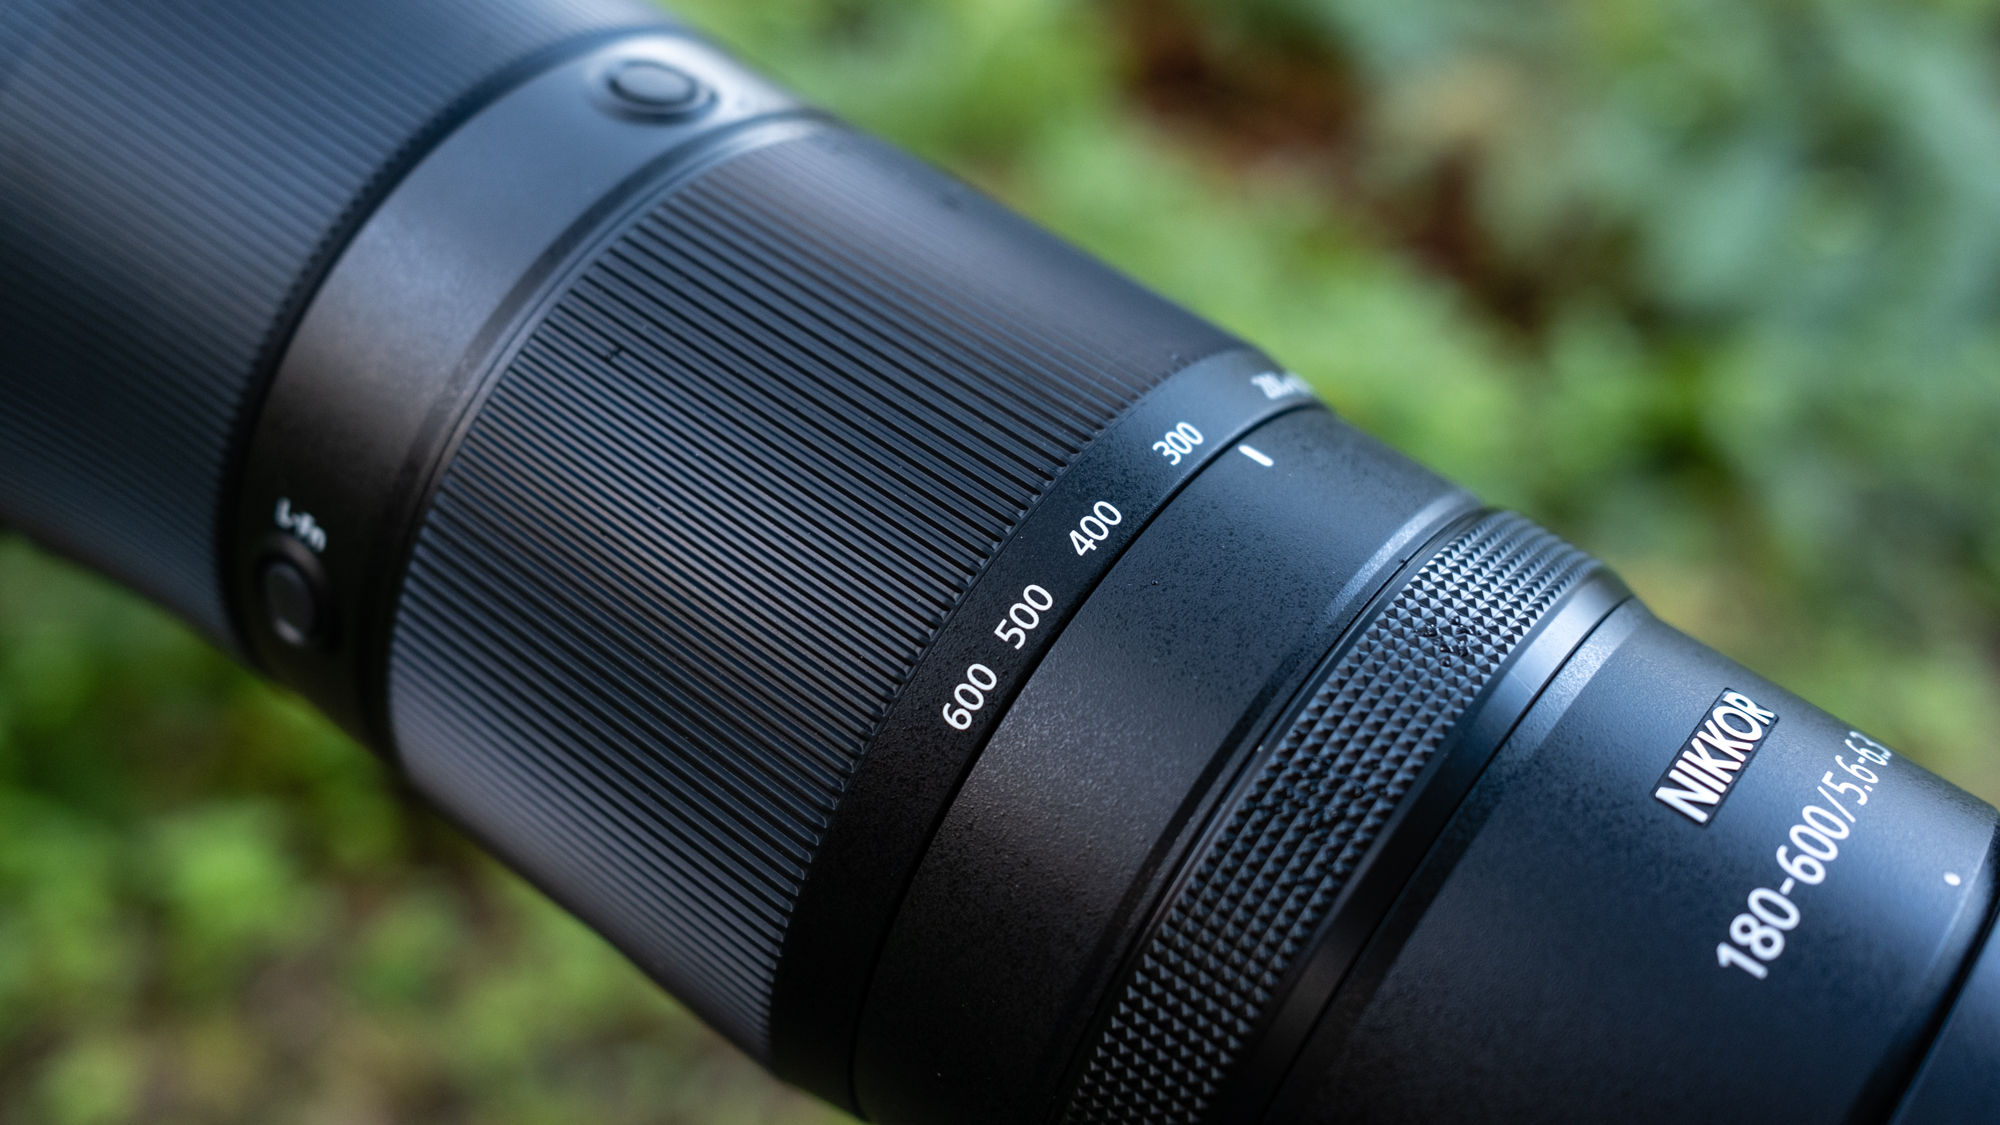 Close up photos of the Nikkor Z 180-600mm f/5.6-6.3 VR mounted on a tripod with foliage in the background